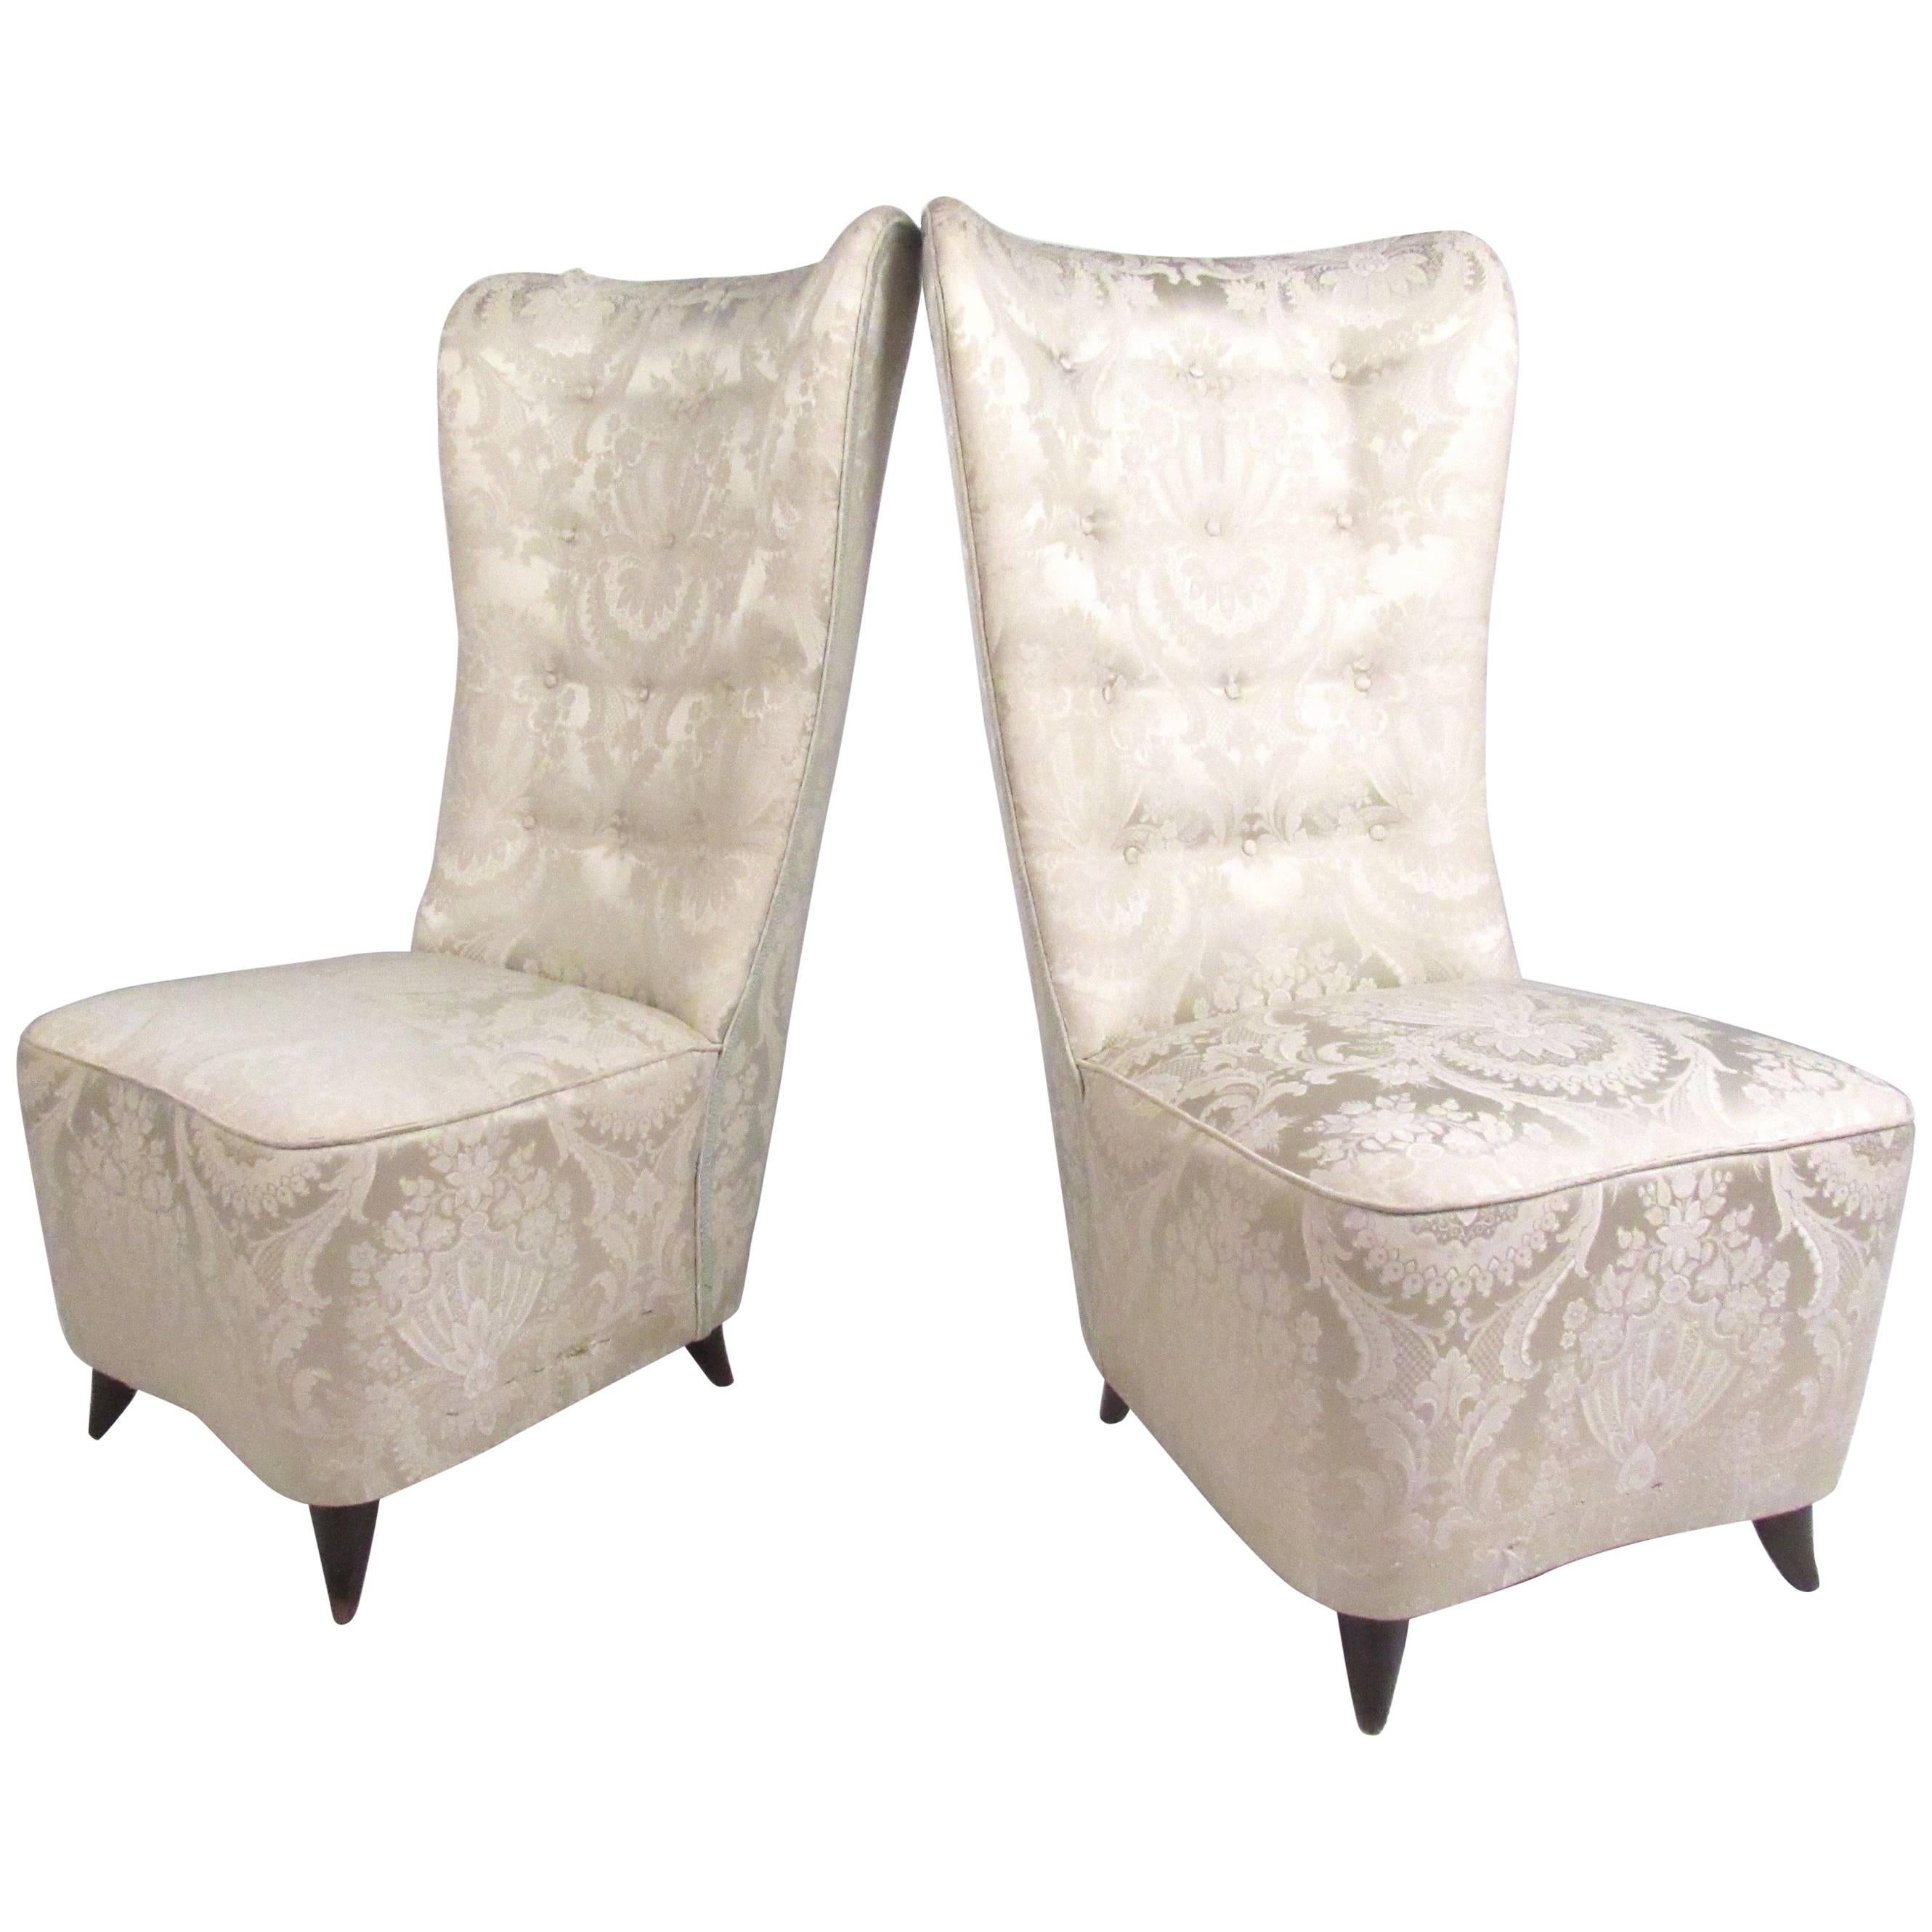 Pair of Italian Modern Slipper Chairs in the Style of Paolo Buffa